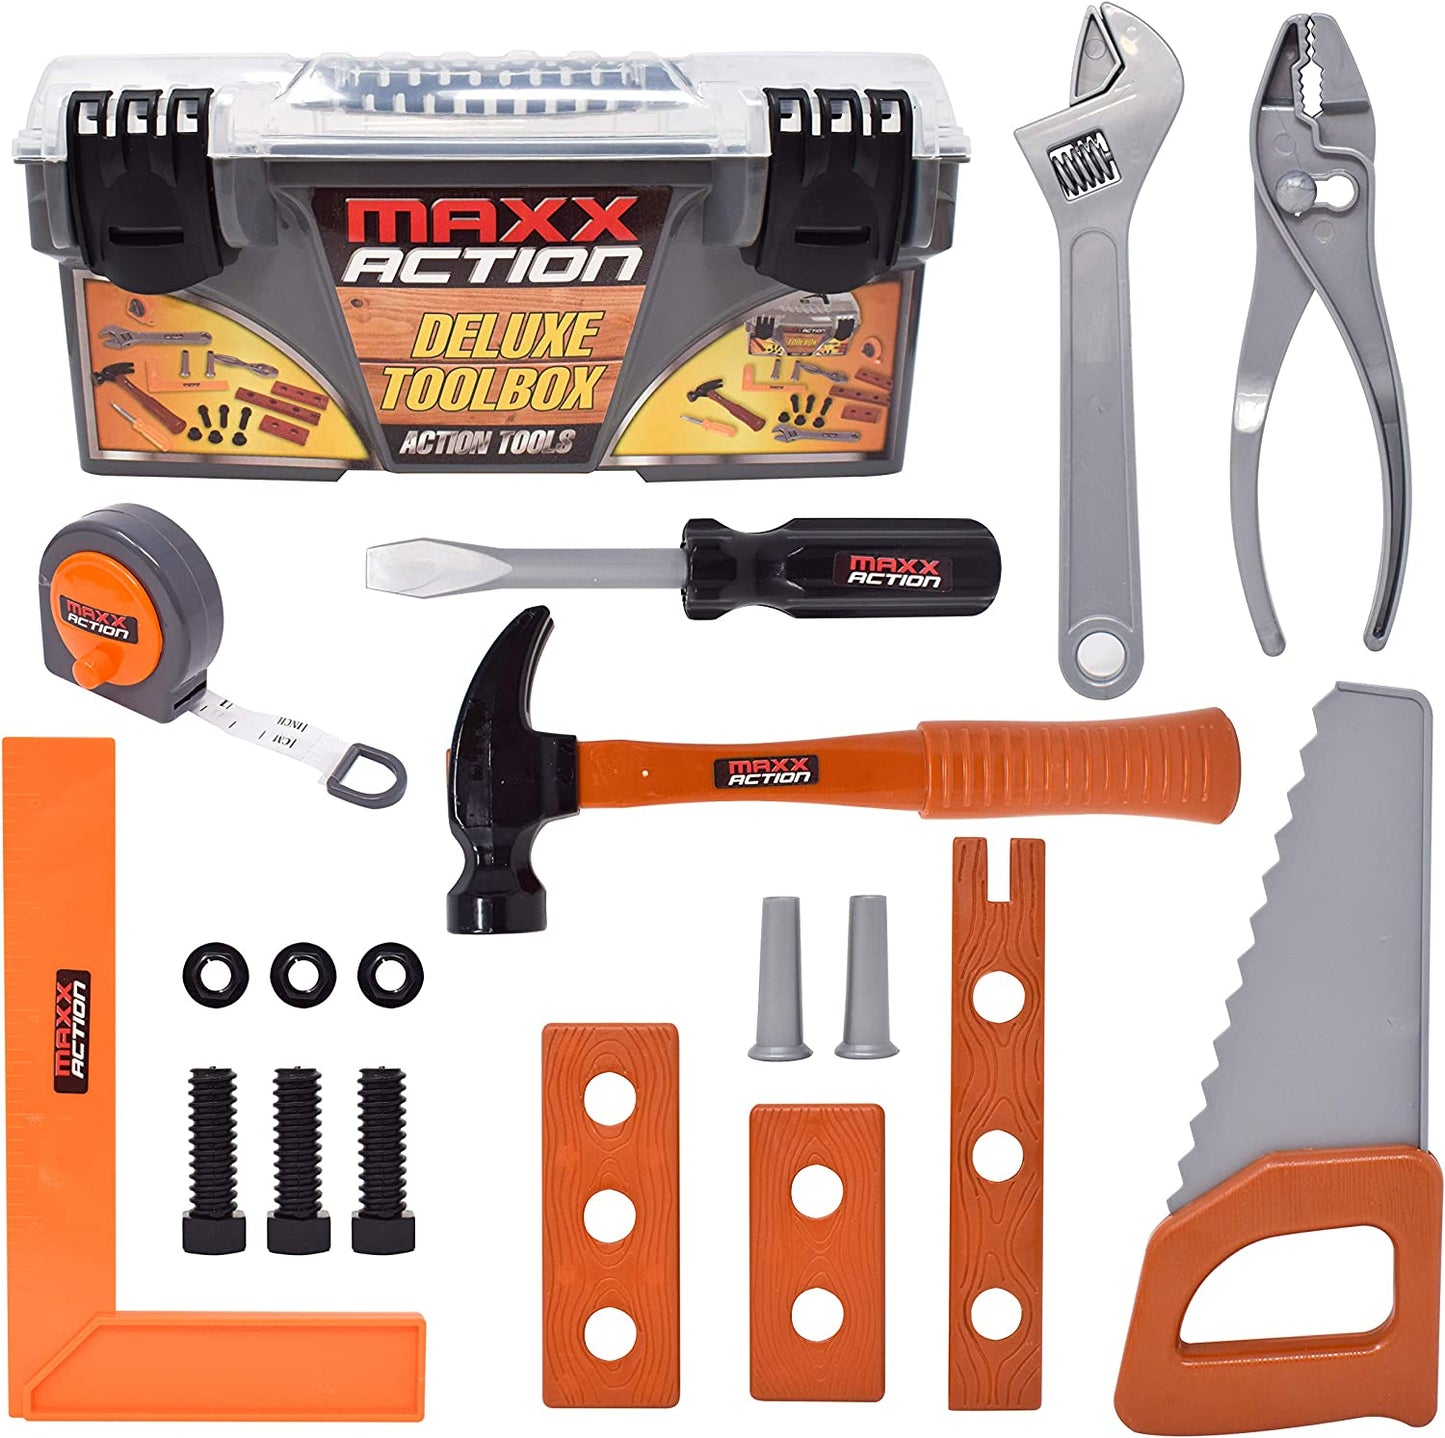 18 pc Deluxe Toolbox Action Tools